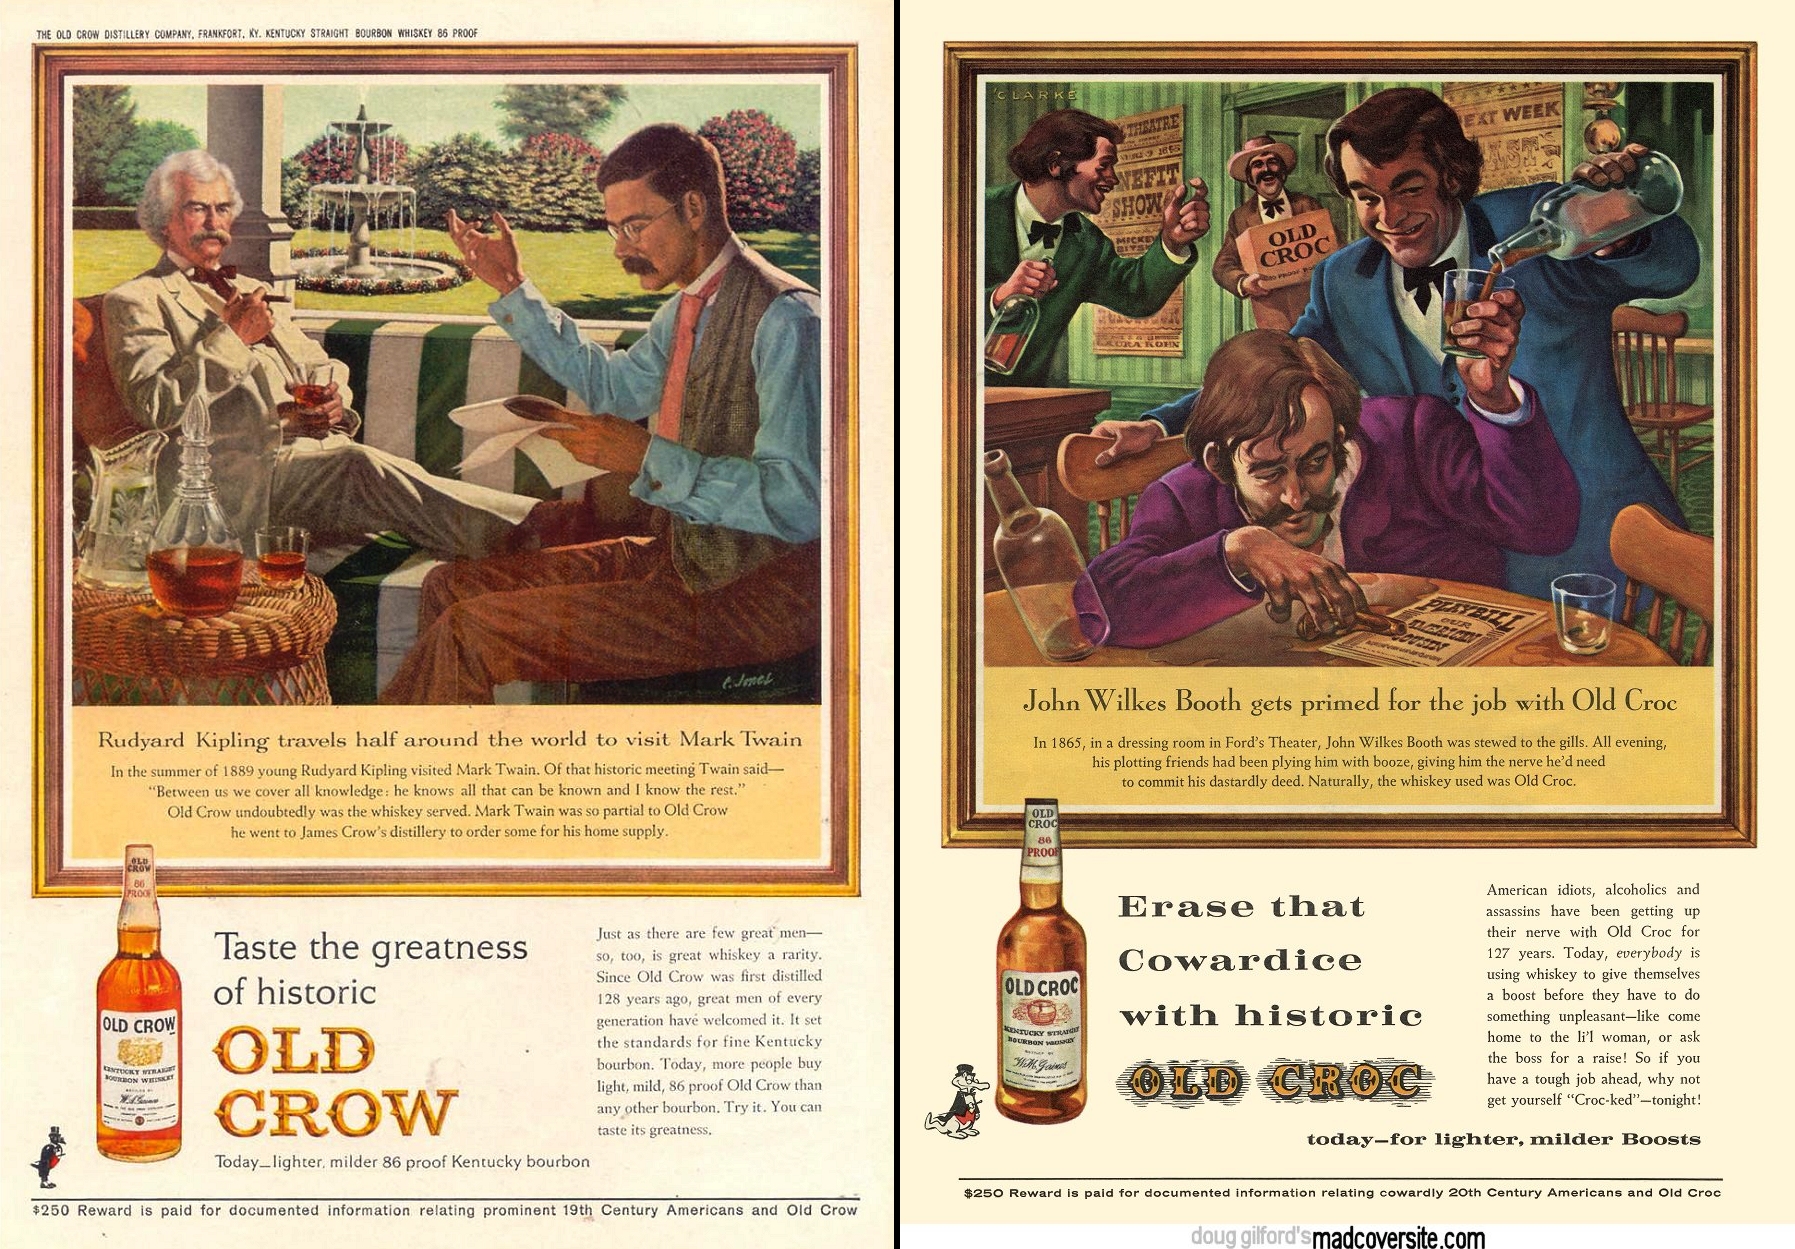 Old Crow whiskey